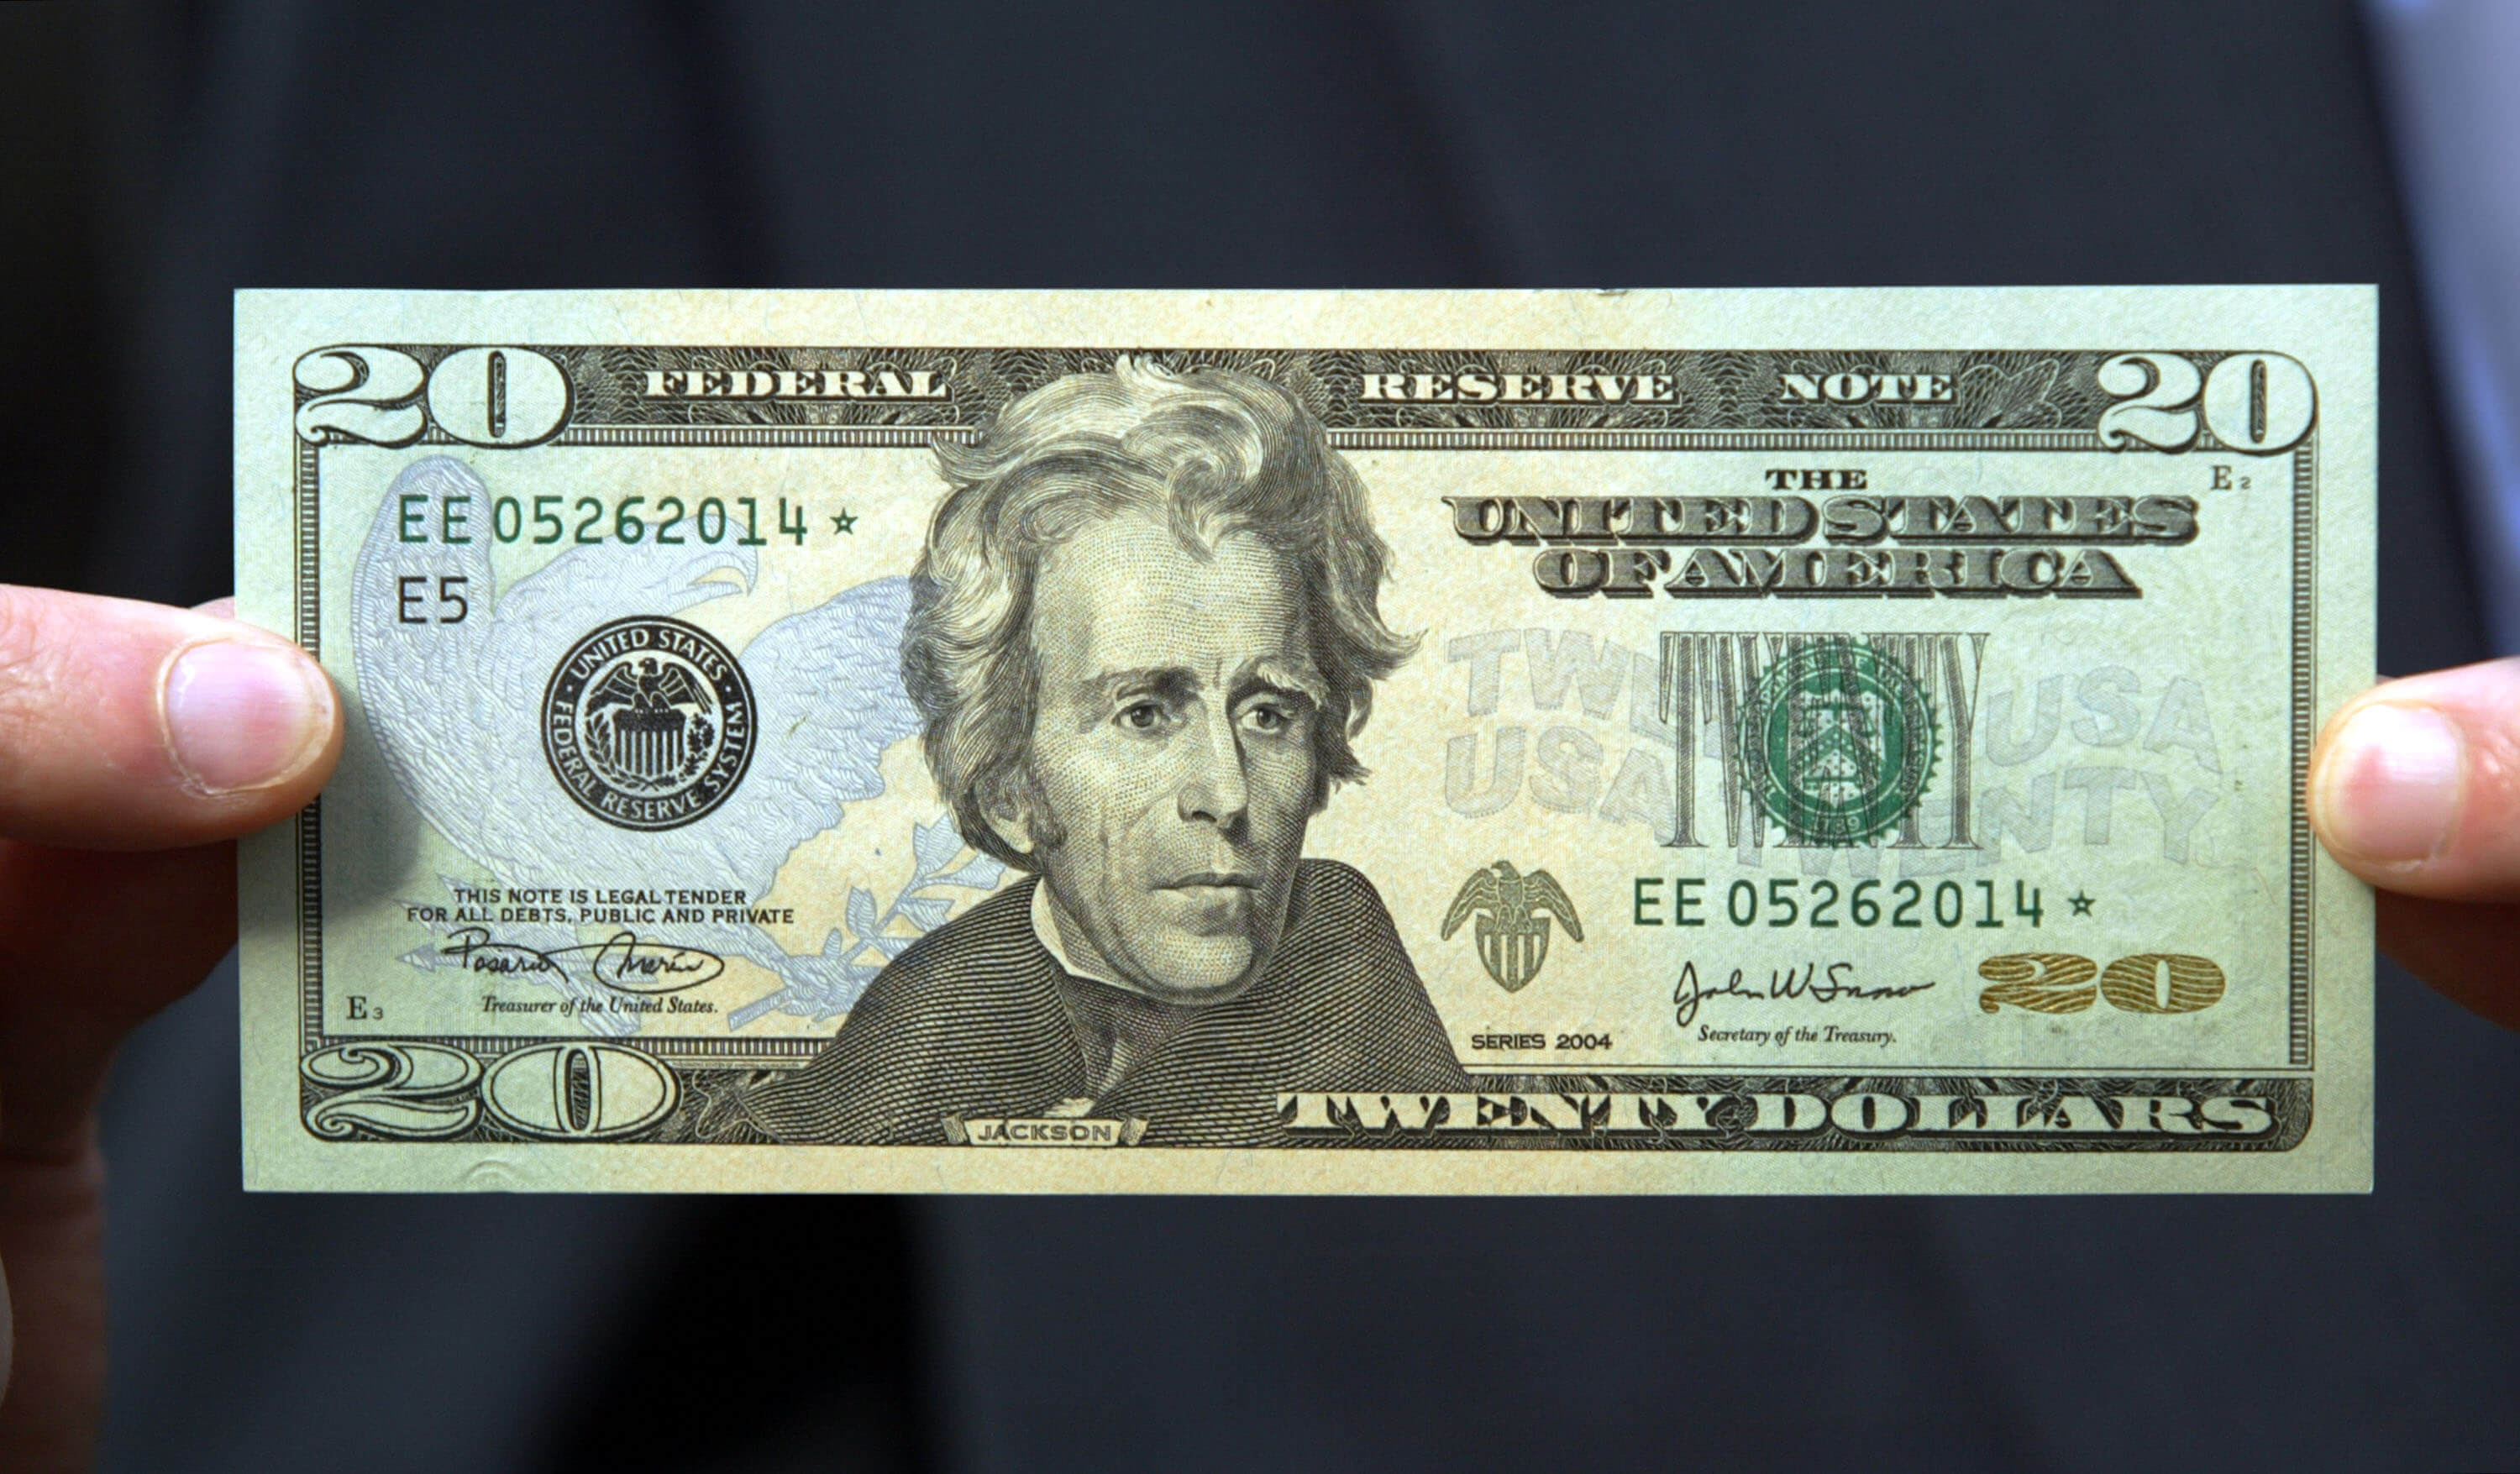 Newly Redesigned 20 Dollar Bill unveiled in Washington - Rubic.us